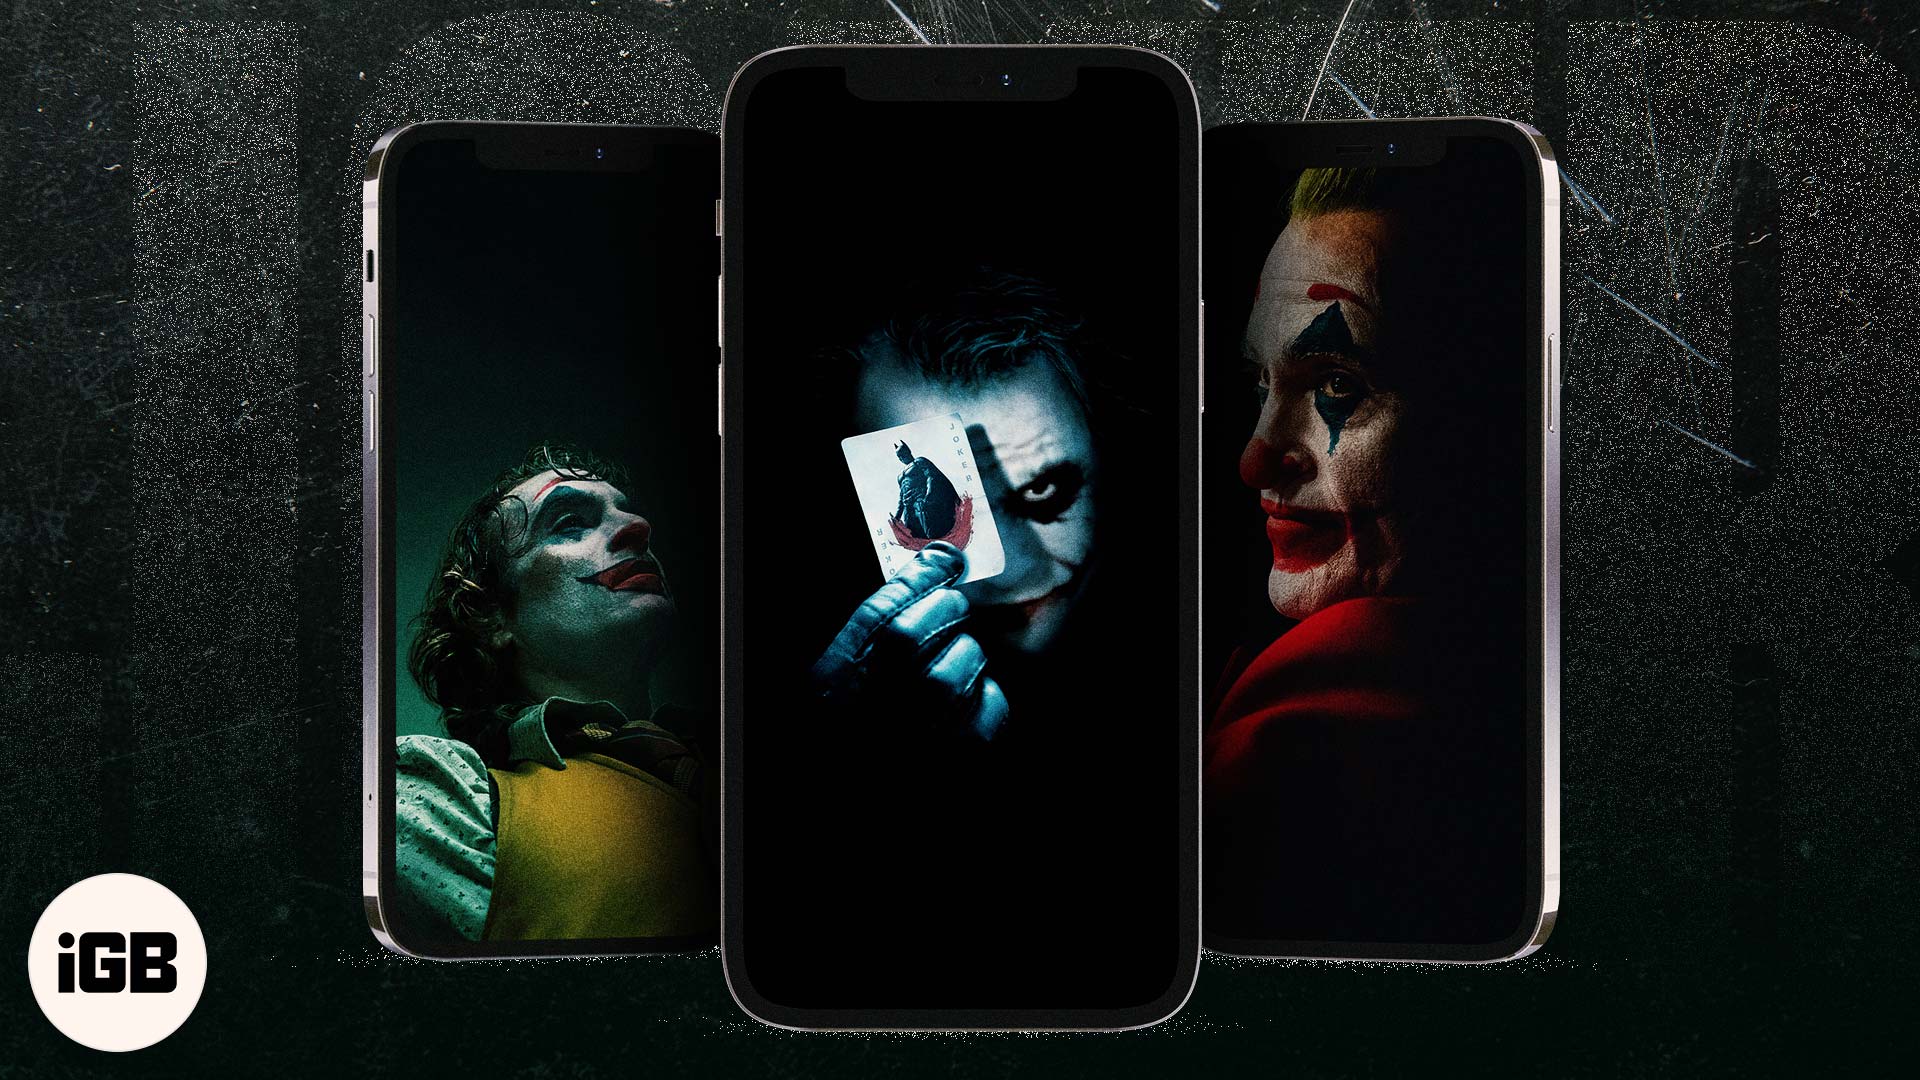 Free joker wallpapers for iphone in hd quality